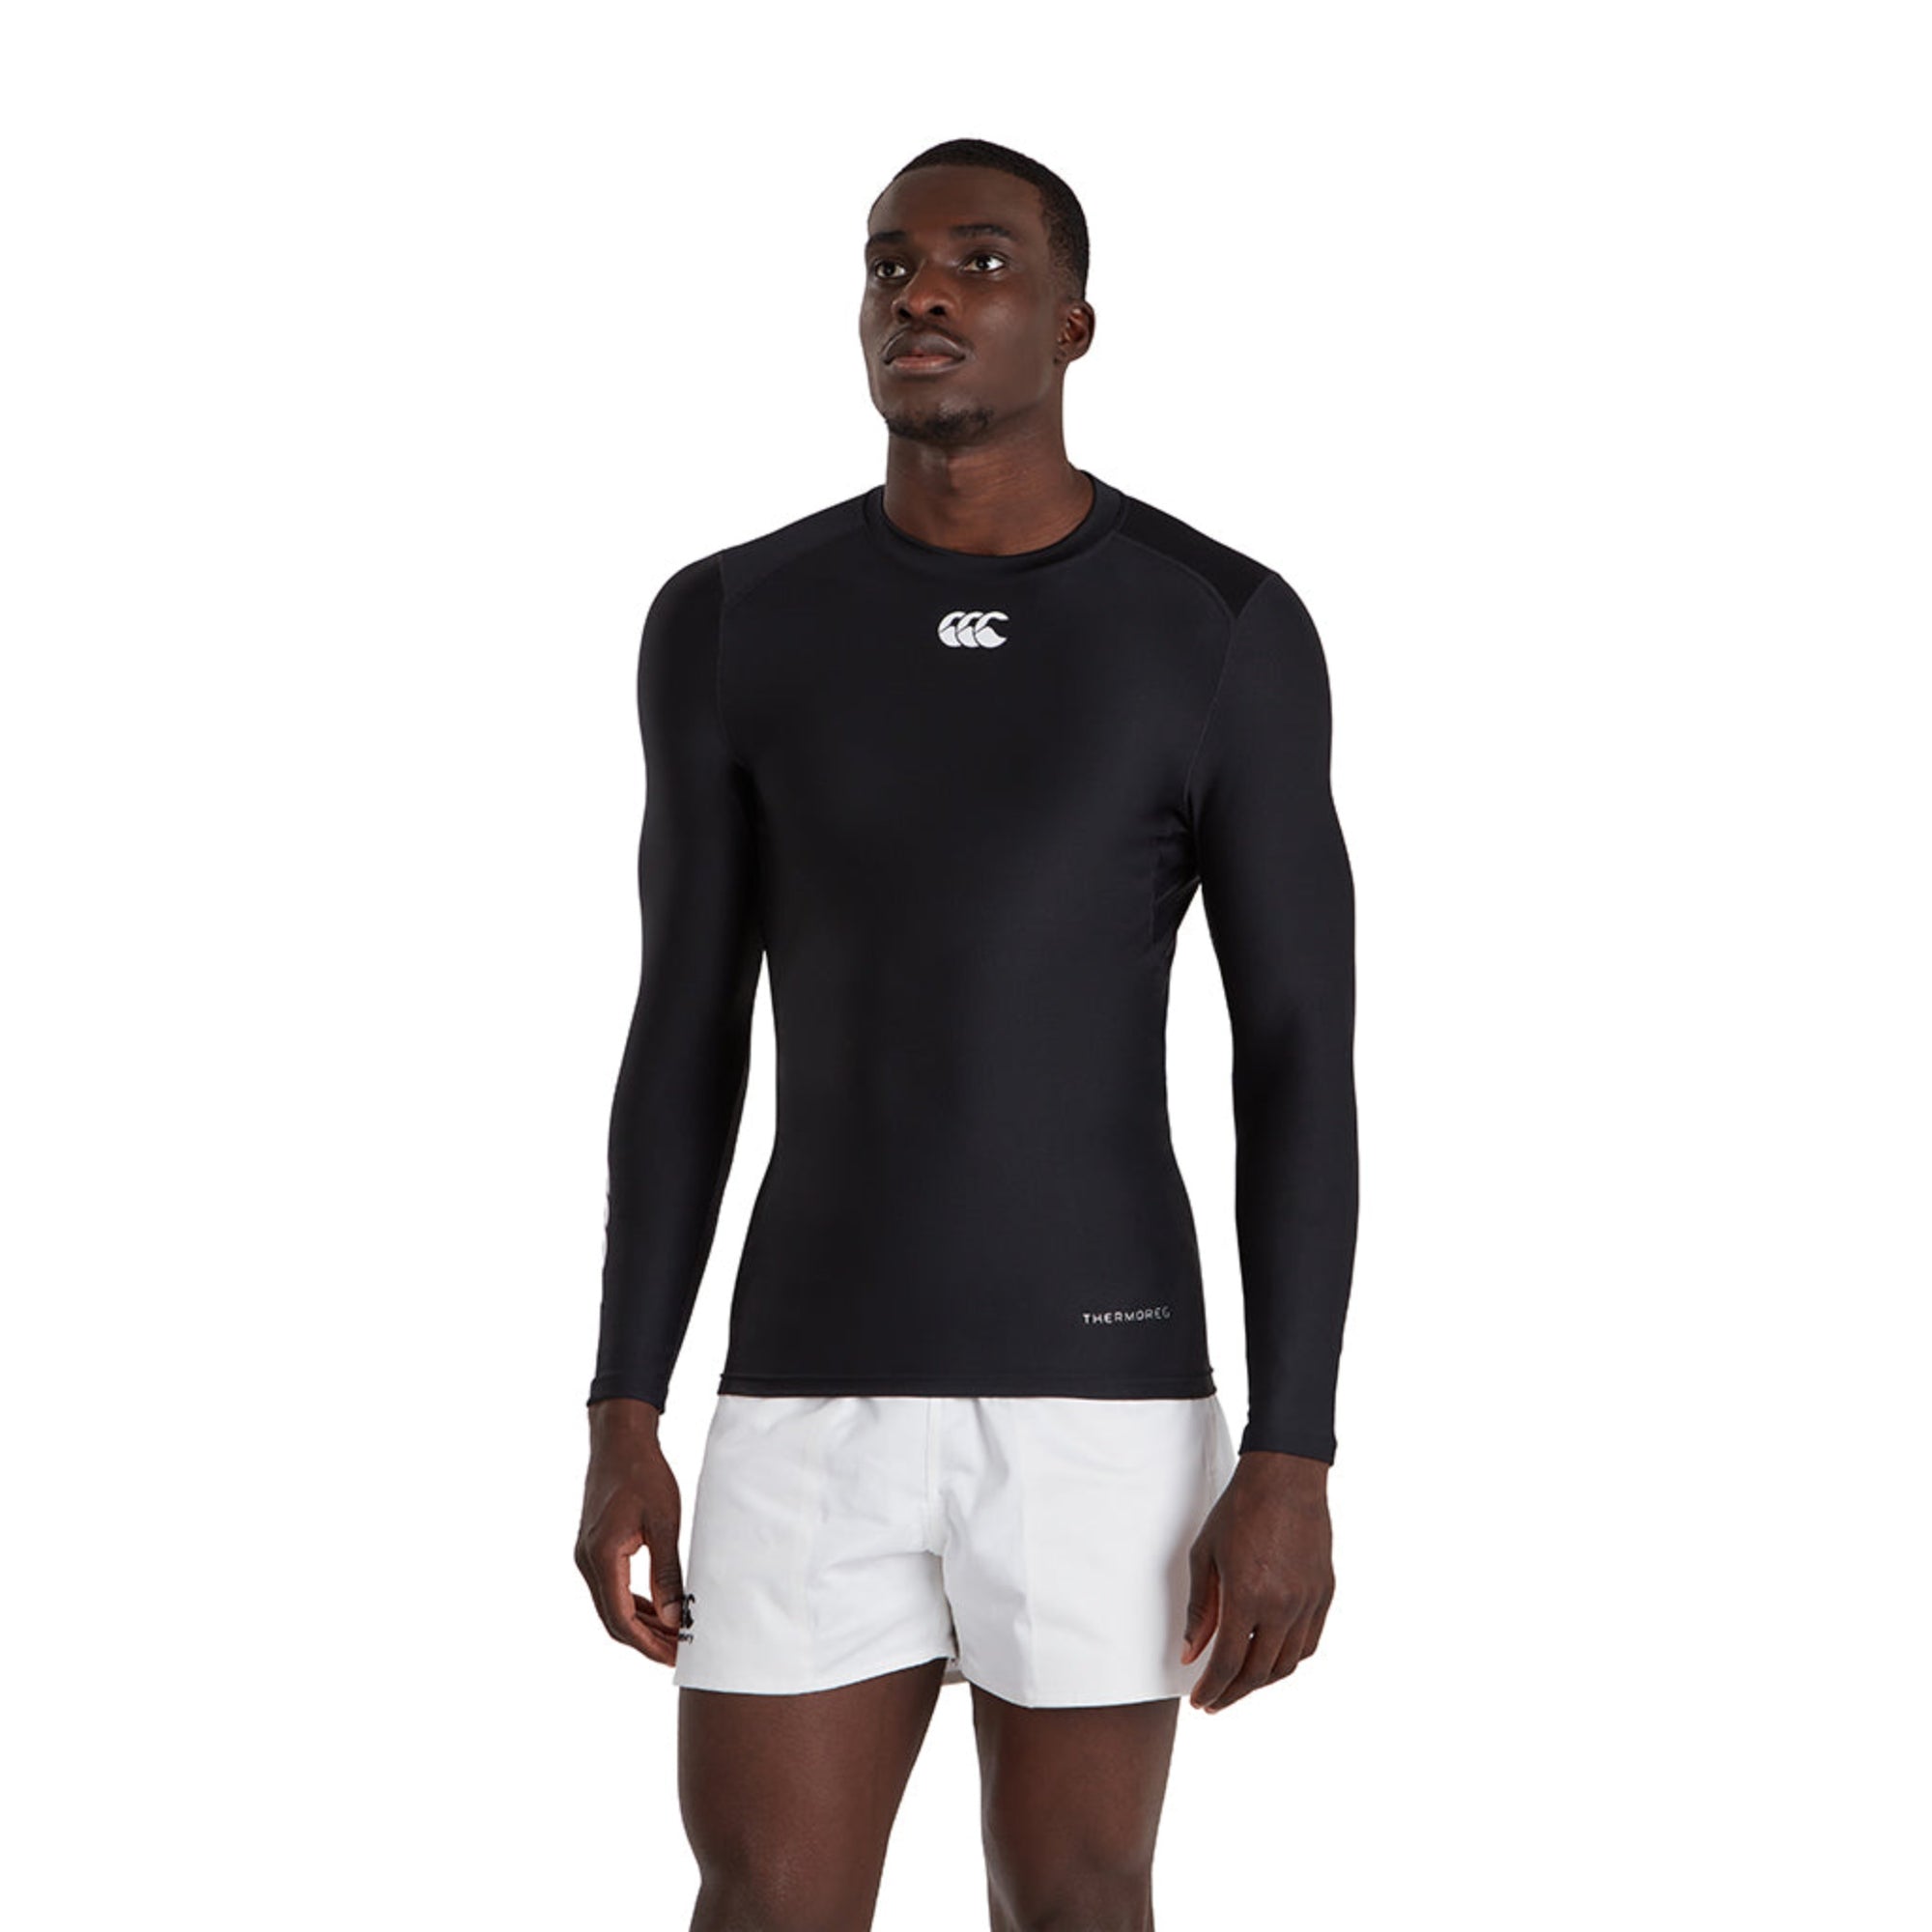 Canterbury CCC Thermoreg Long Sleeve Top - Adult Unisex Sizing S-4XL - Black